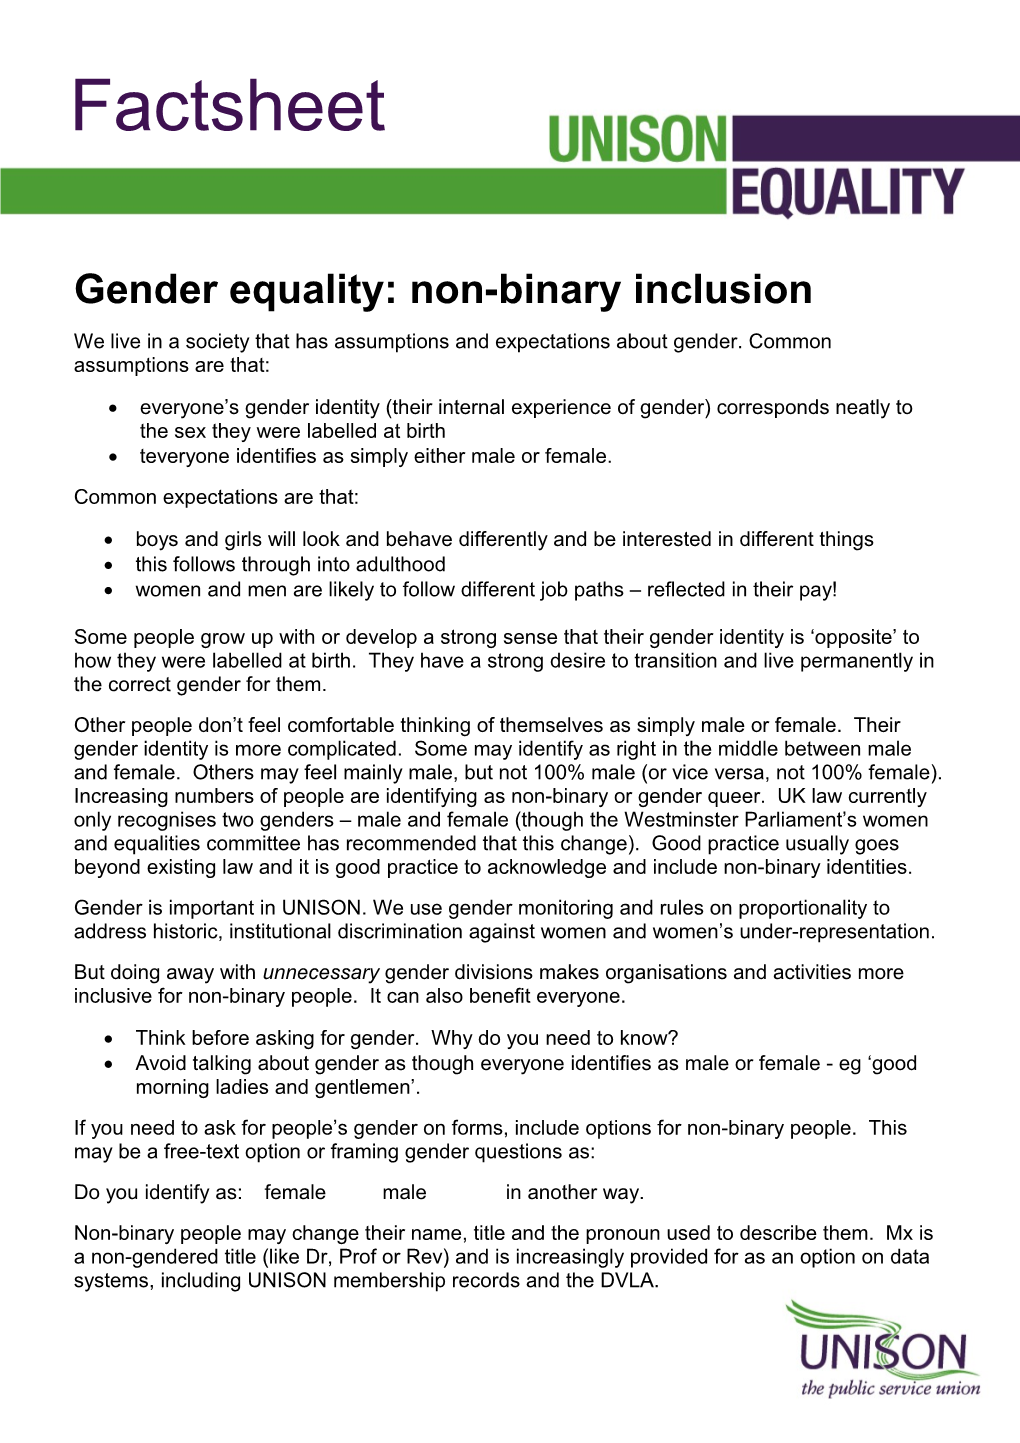 Gender Equality: Non-Binary Inclusion